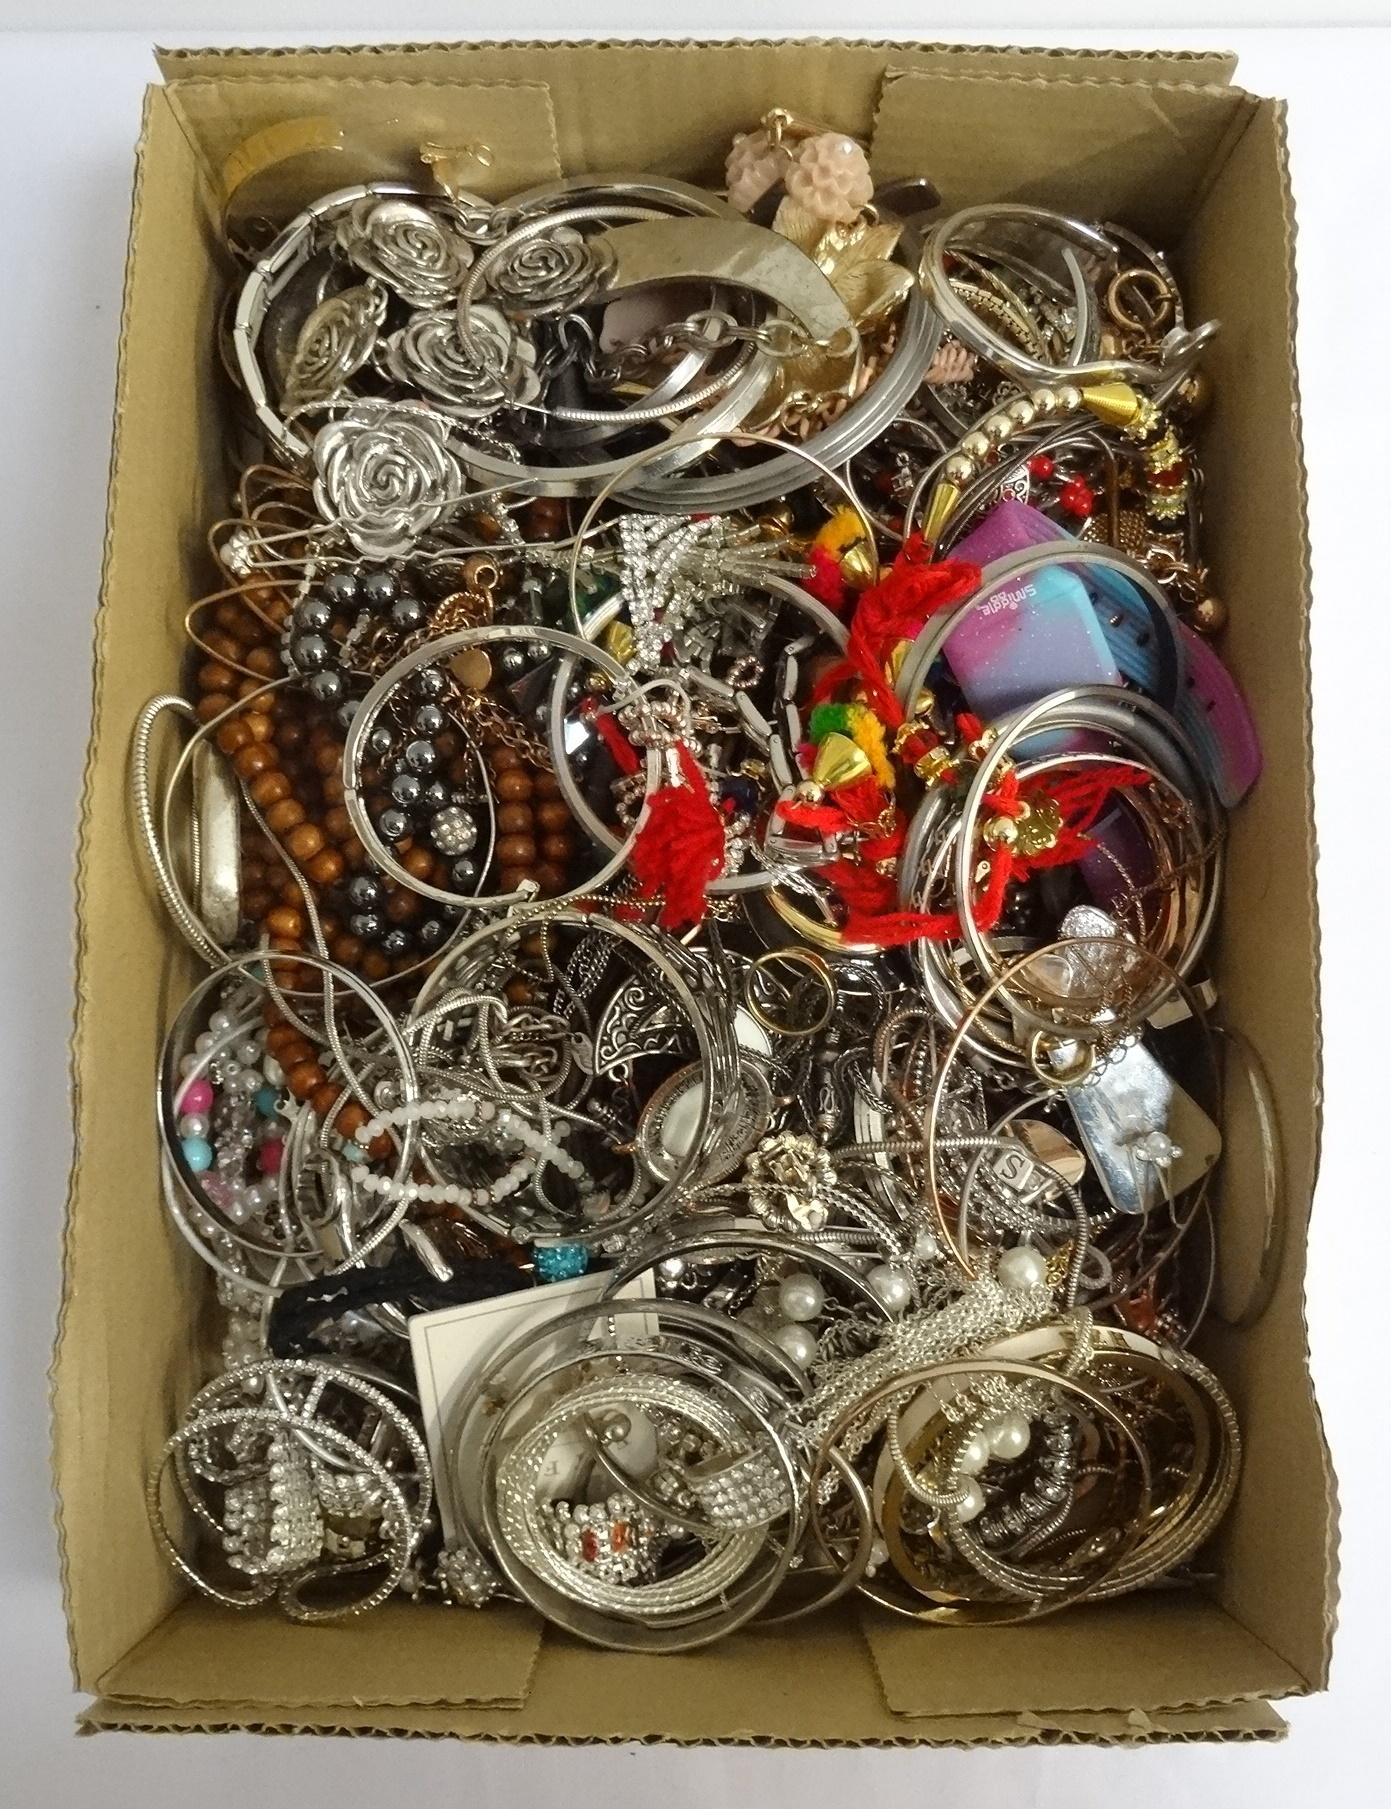 SELECTION OF COSTUME JEWELLERY including bangles, bracelets, pendants, necklaces and earrings, 1 box